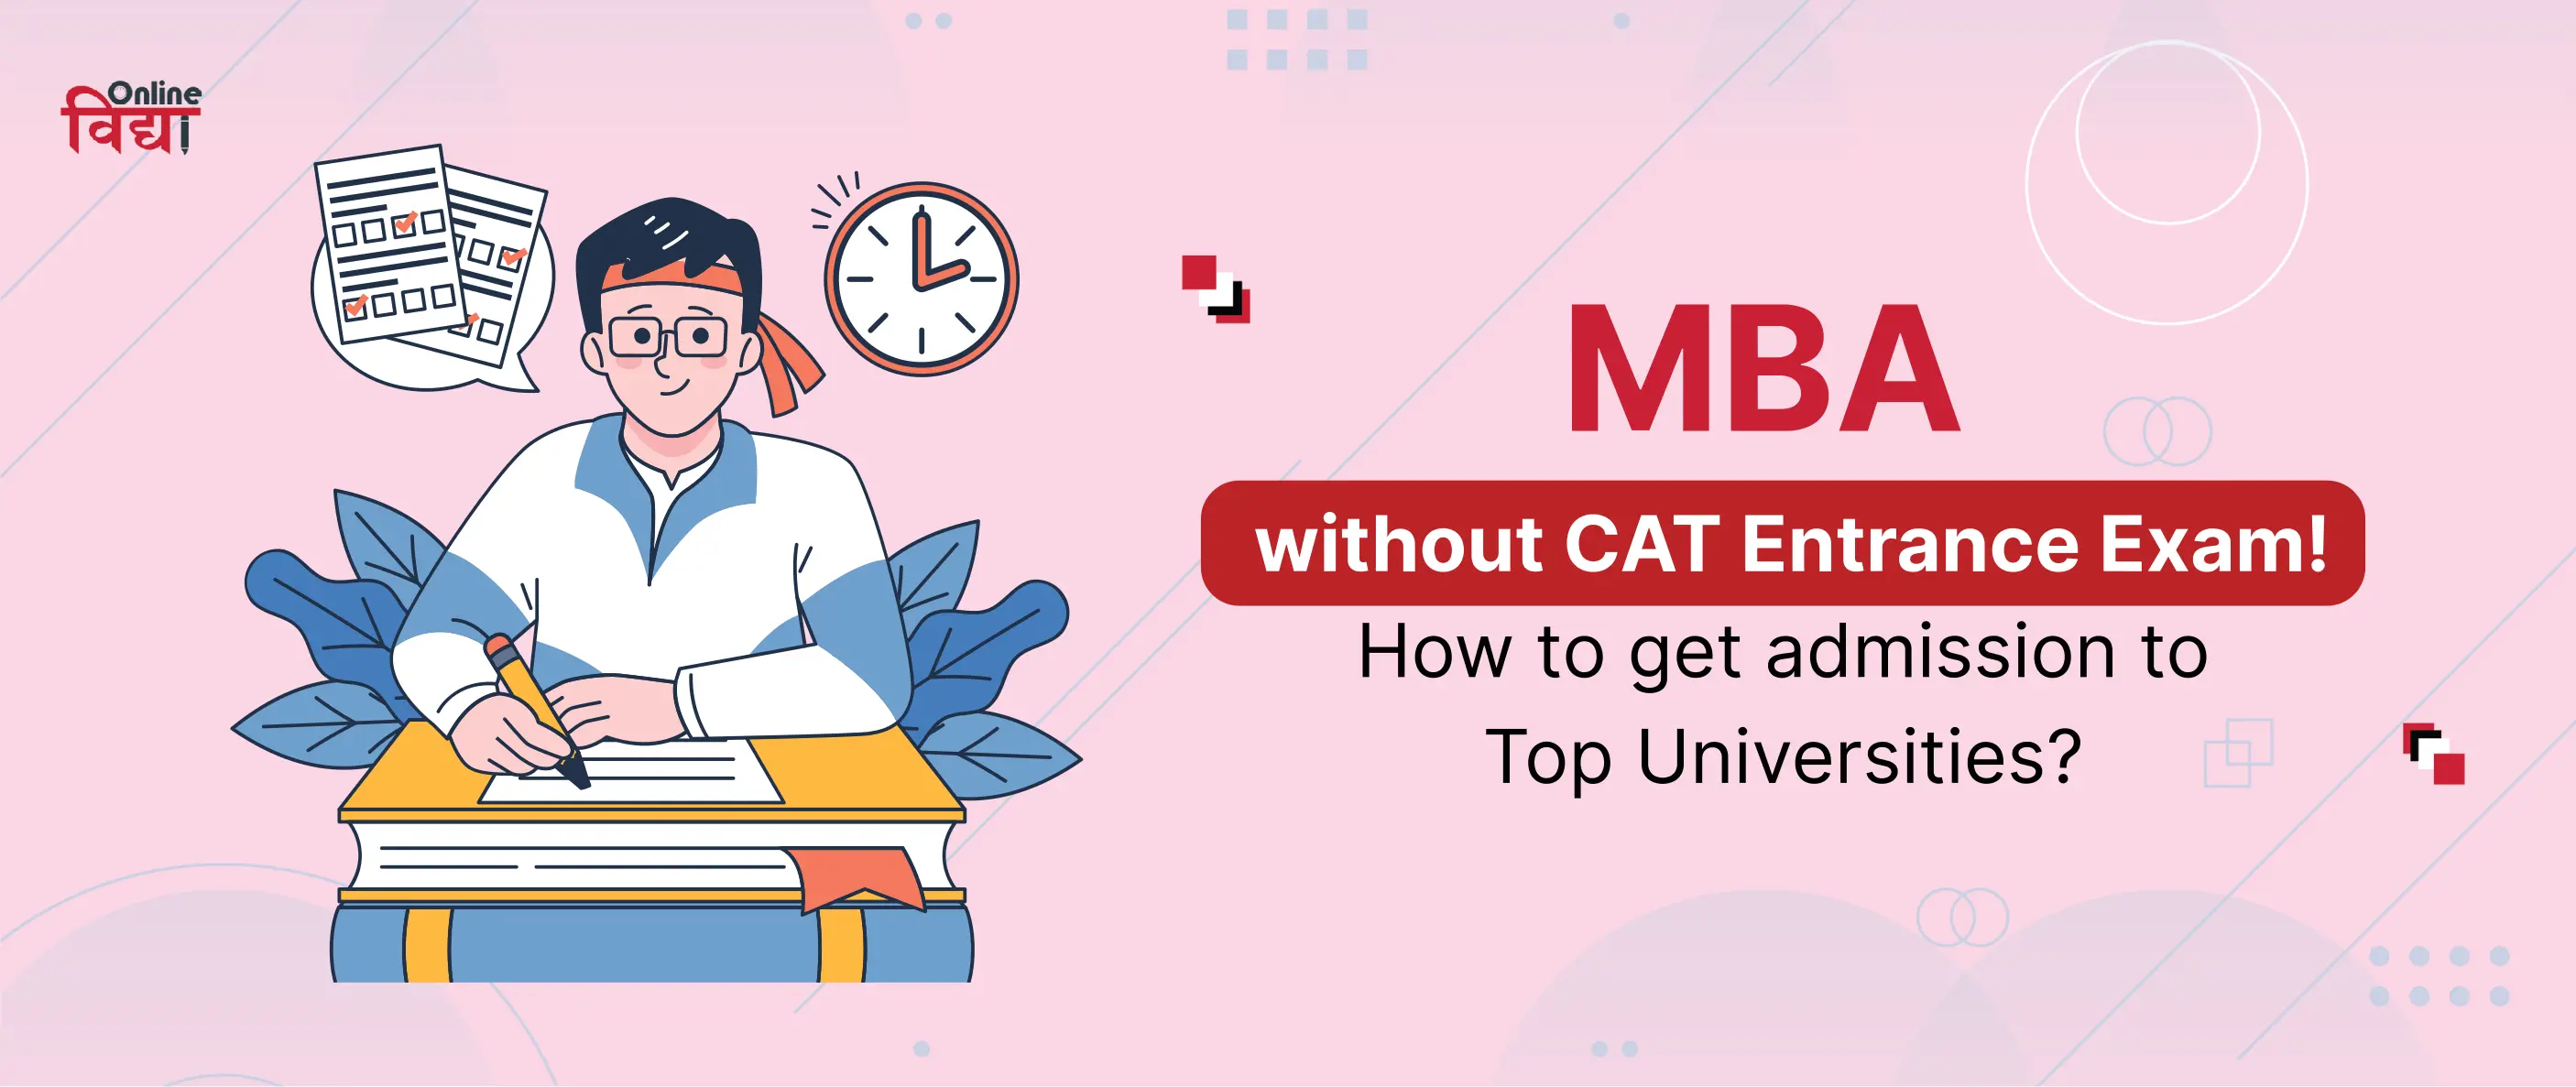 MBA without CAT Entrance Exam! How to get admission to Top Universities?